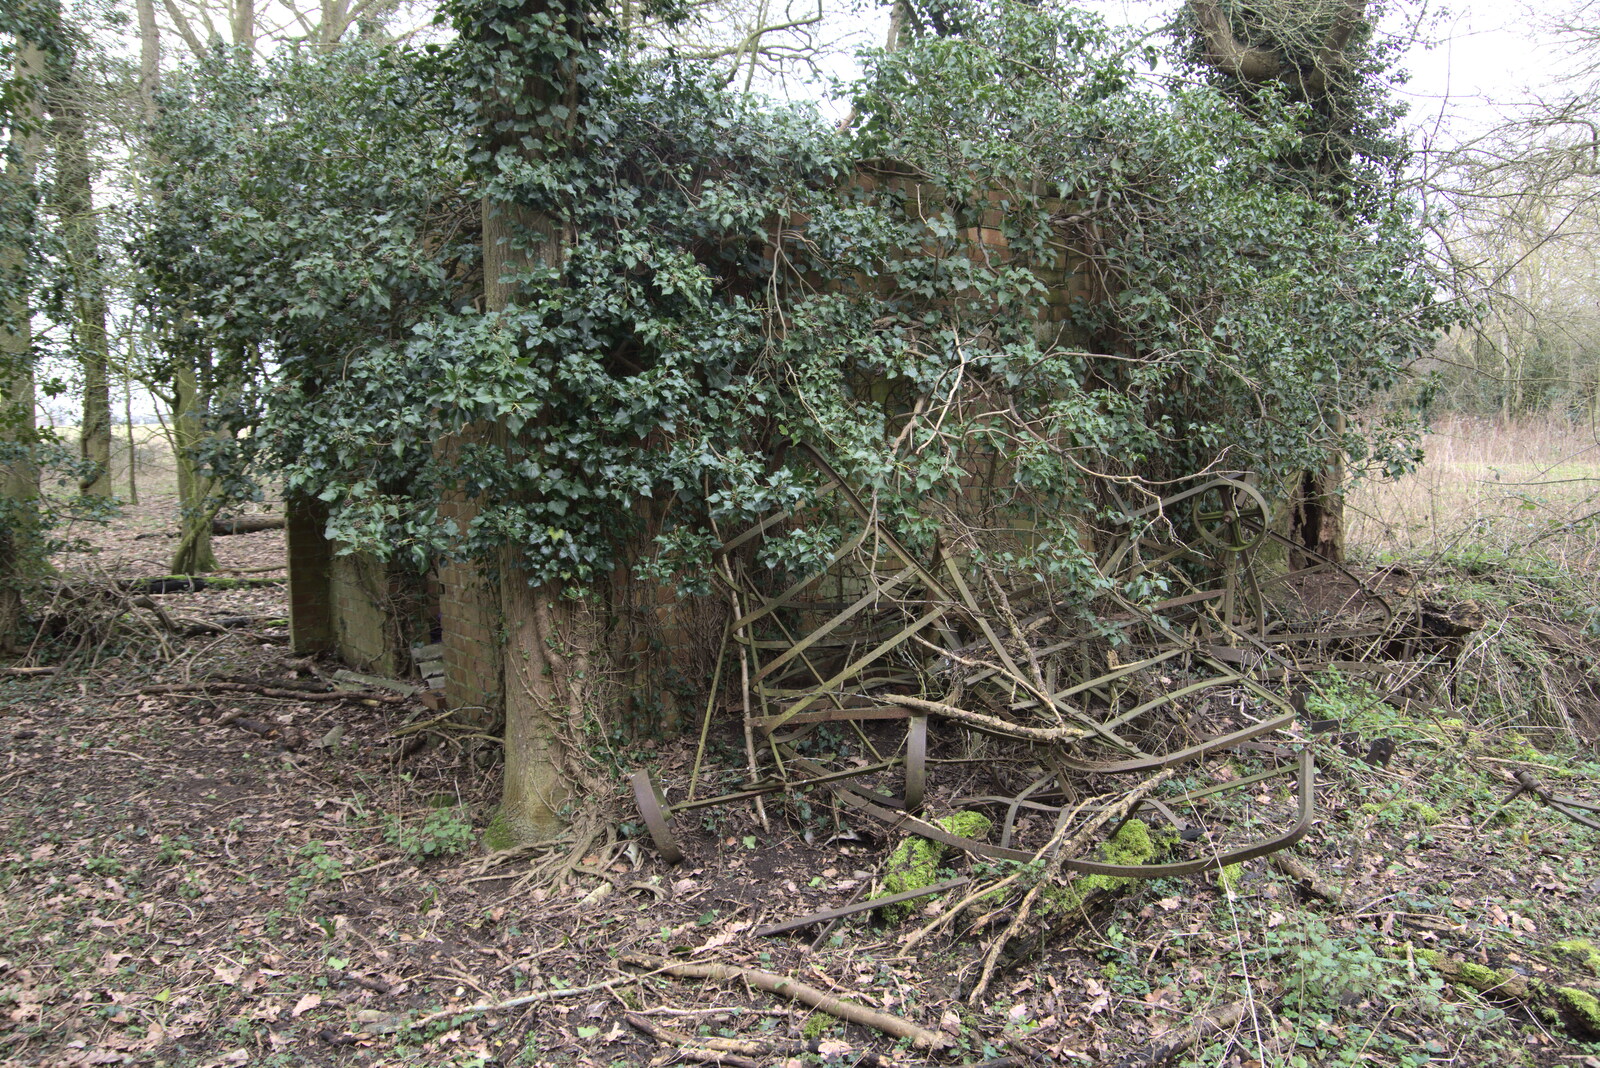 An overgrown pumping station from The Old Sewage Works, The Avenue, Brome, Suffolk - 20th February 2021